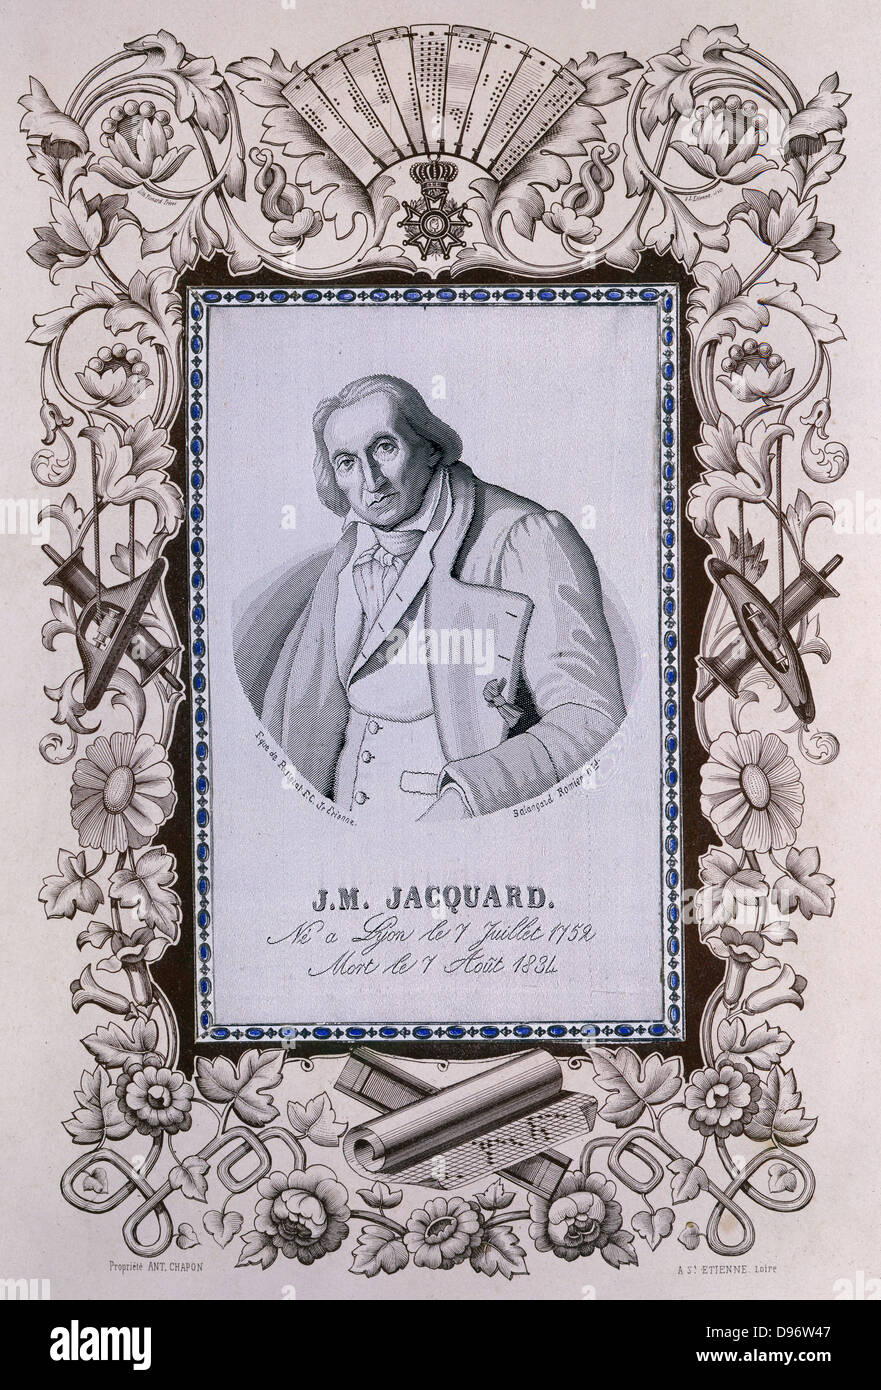 Joseph Marie Jacquard (1752-1834) French silk-weaver and inventor. Portrait woven by Jacquard loom, surrounded by printed border showing punched cards, paper for designing patterns, shuttles, bobbins, etc. Stock Photo